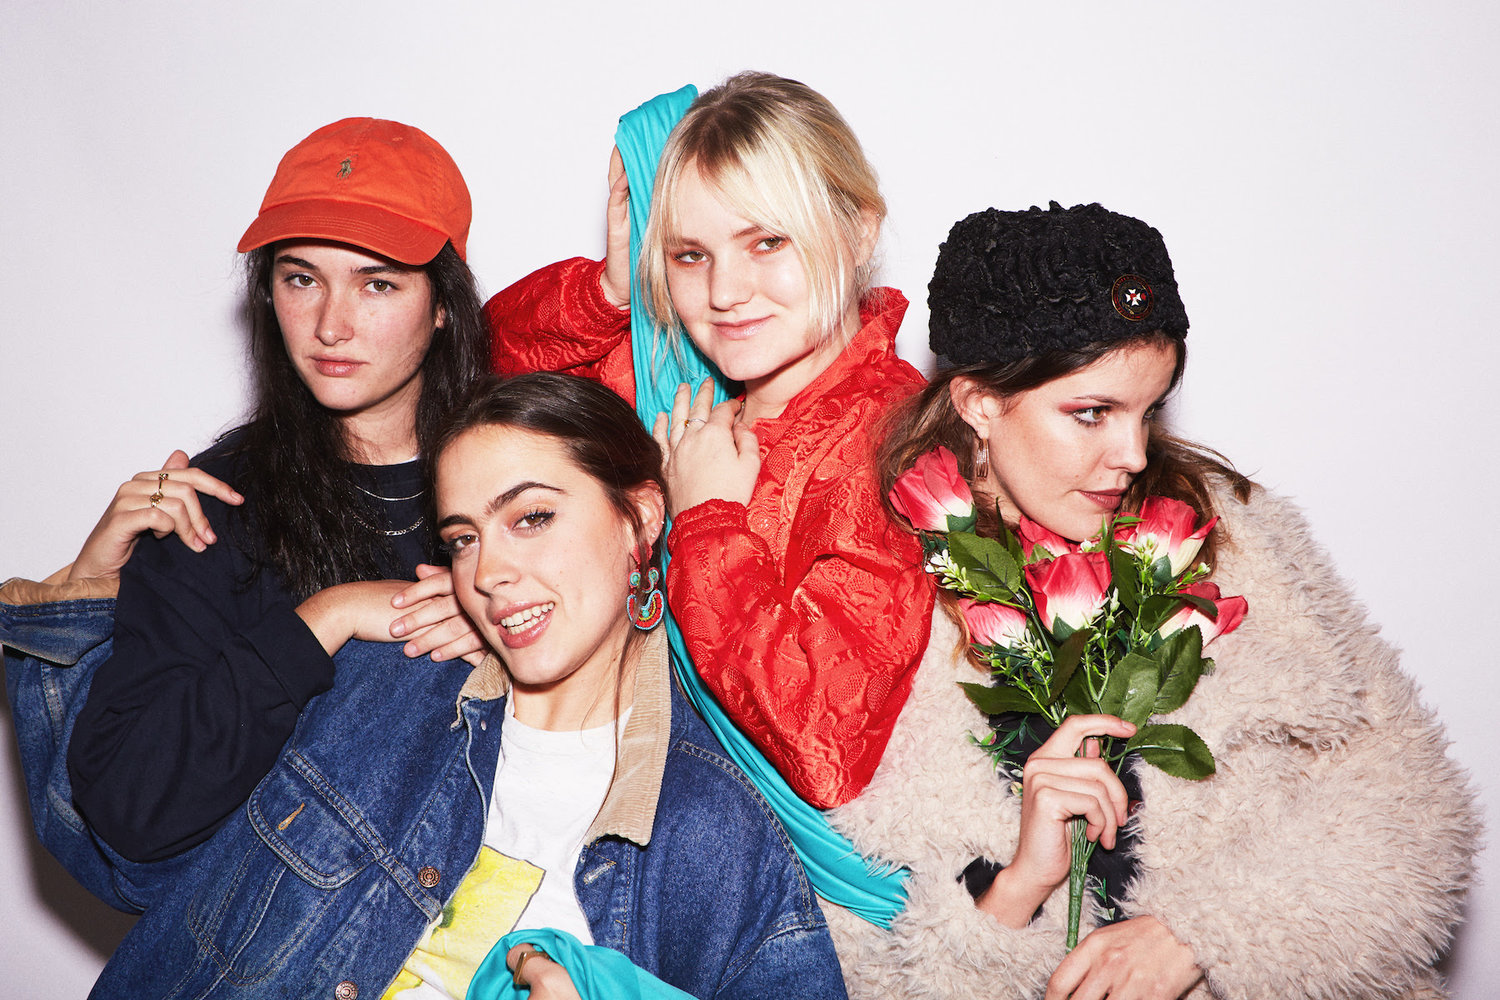 Hinds Interview with Northern Transmissions